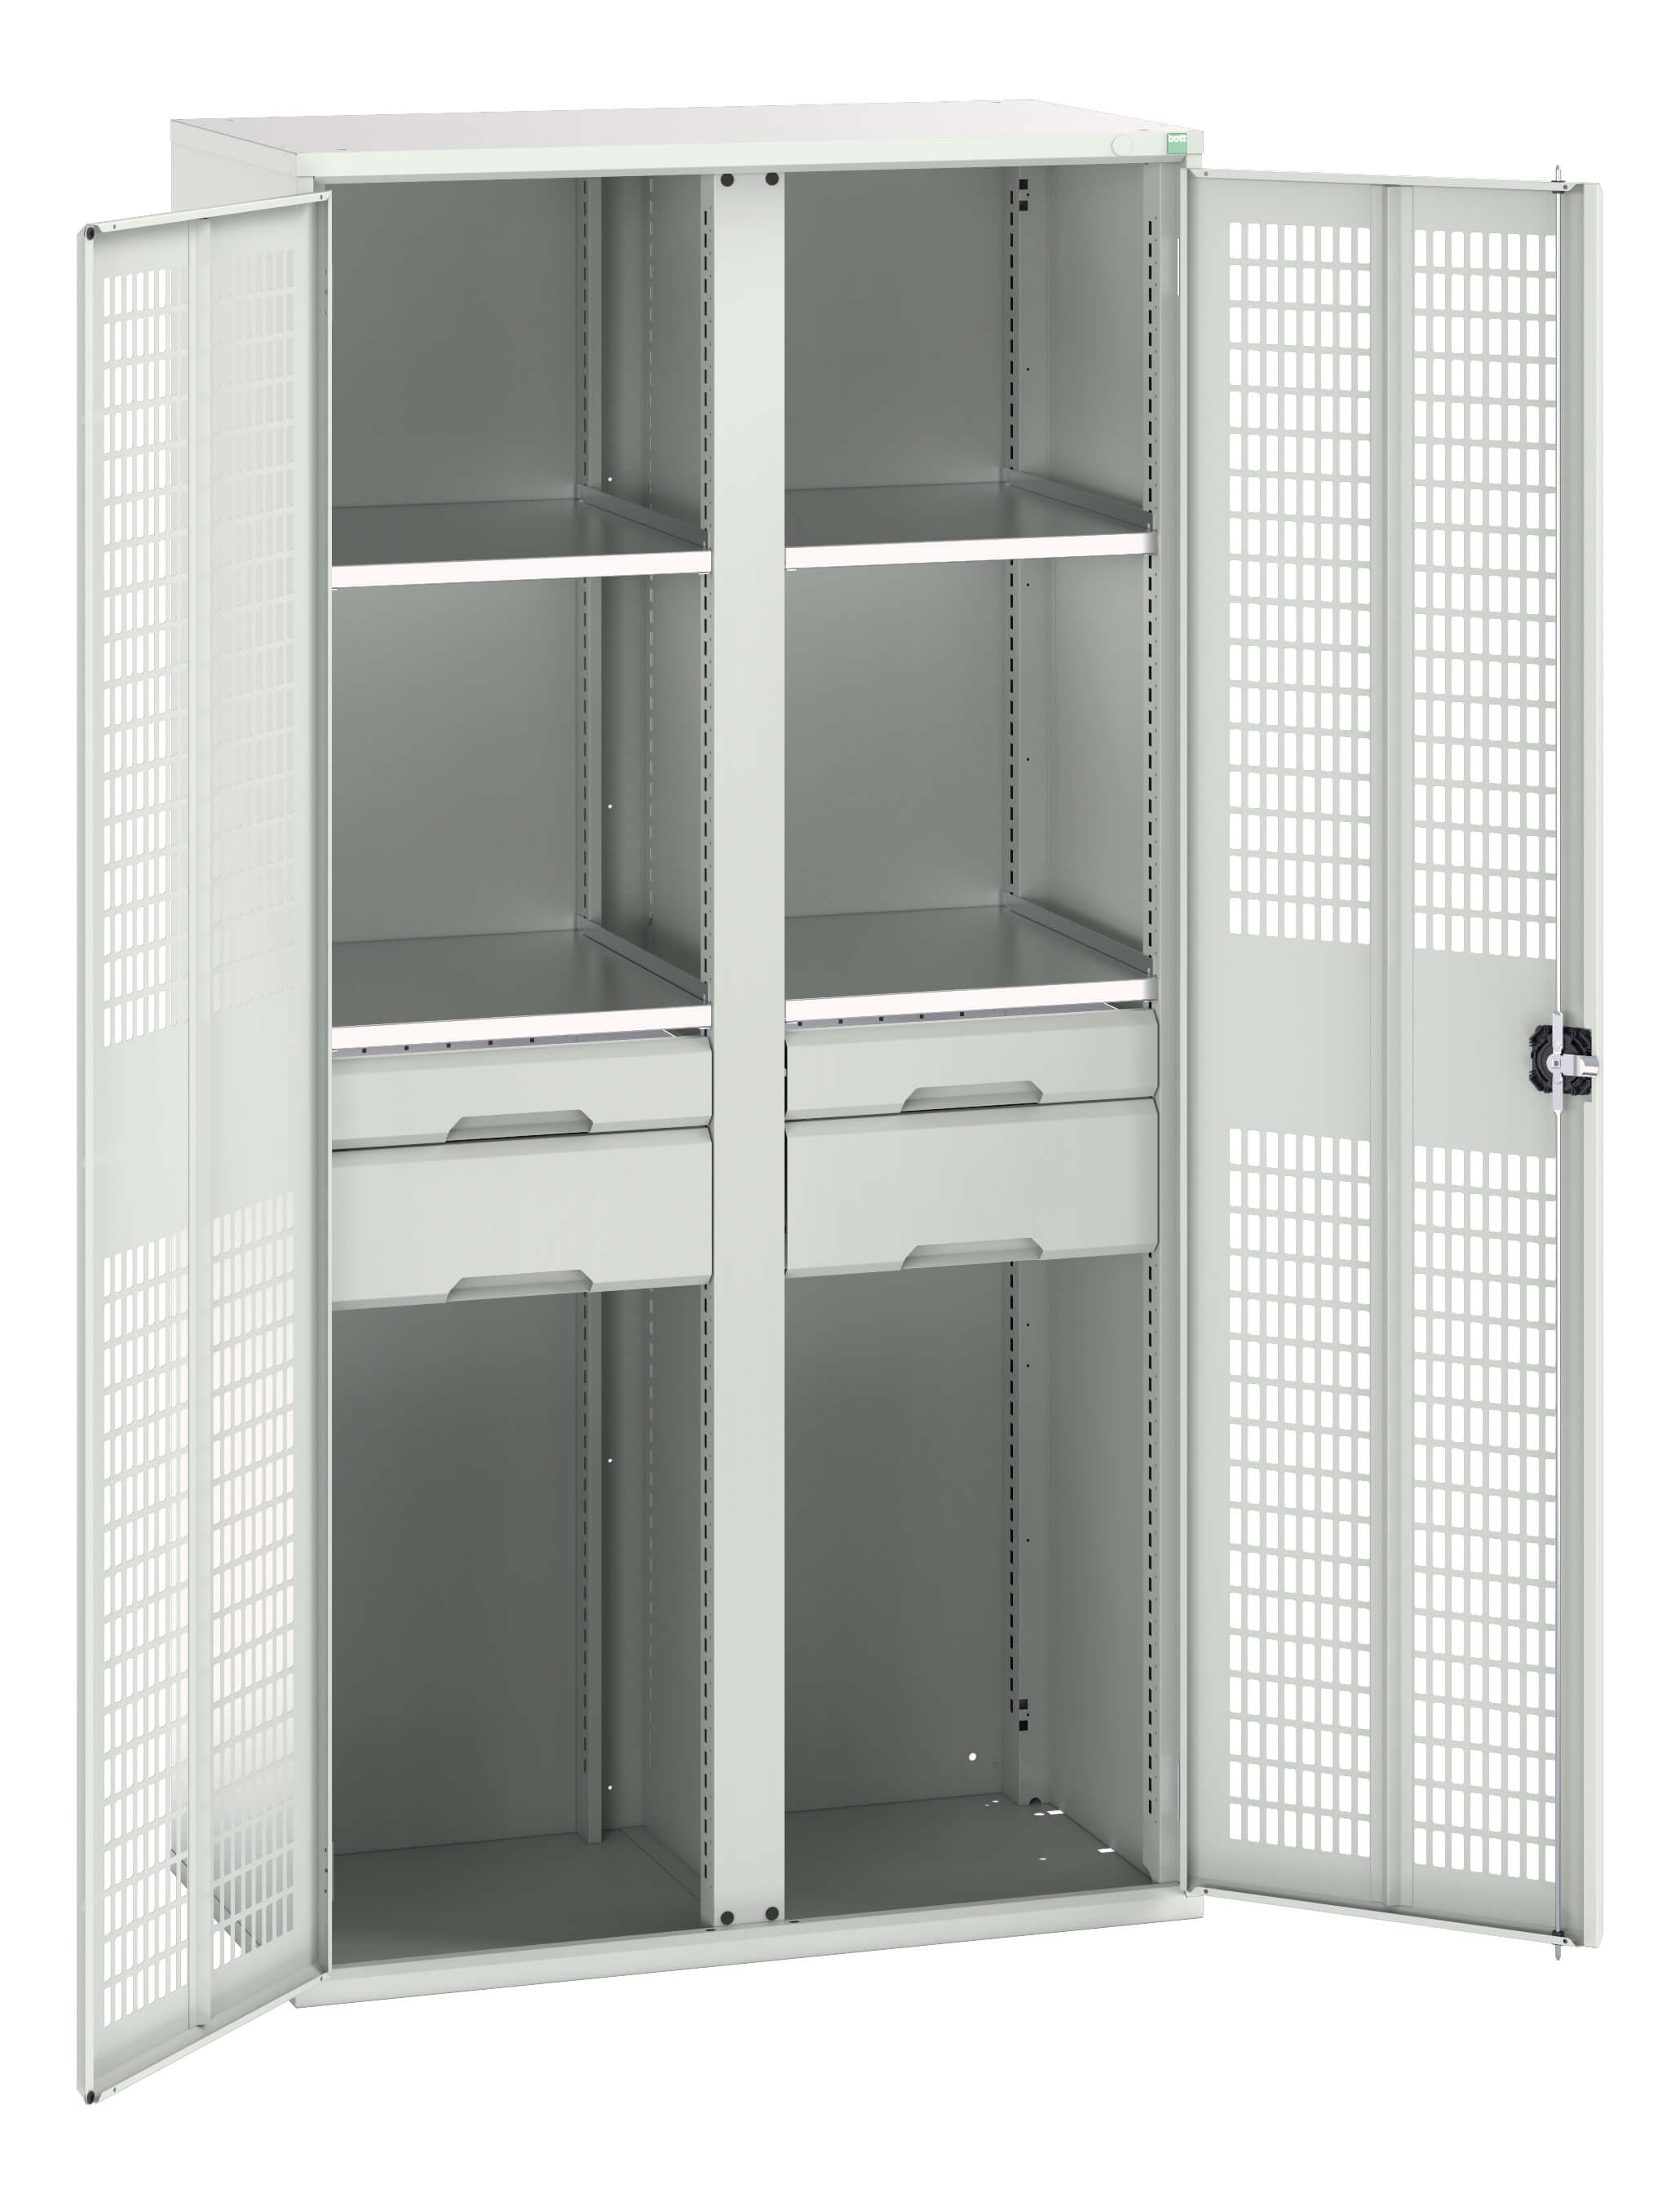 Bott Verso Ventilated Door Kitted Cupboard With Vertical Partition - 16926777.16